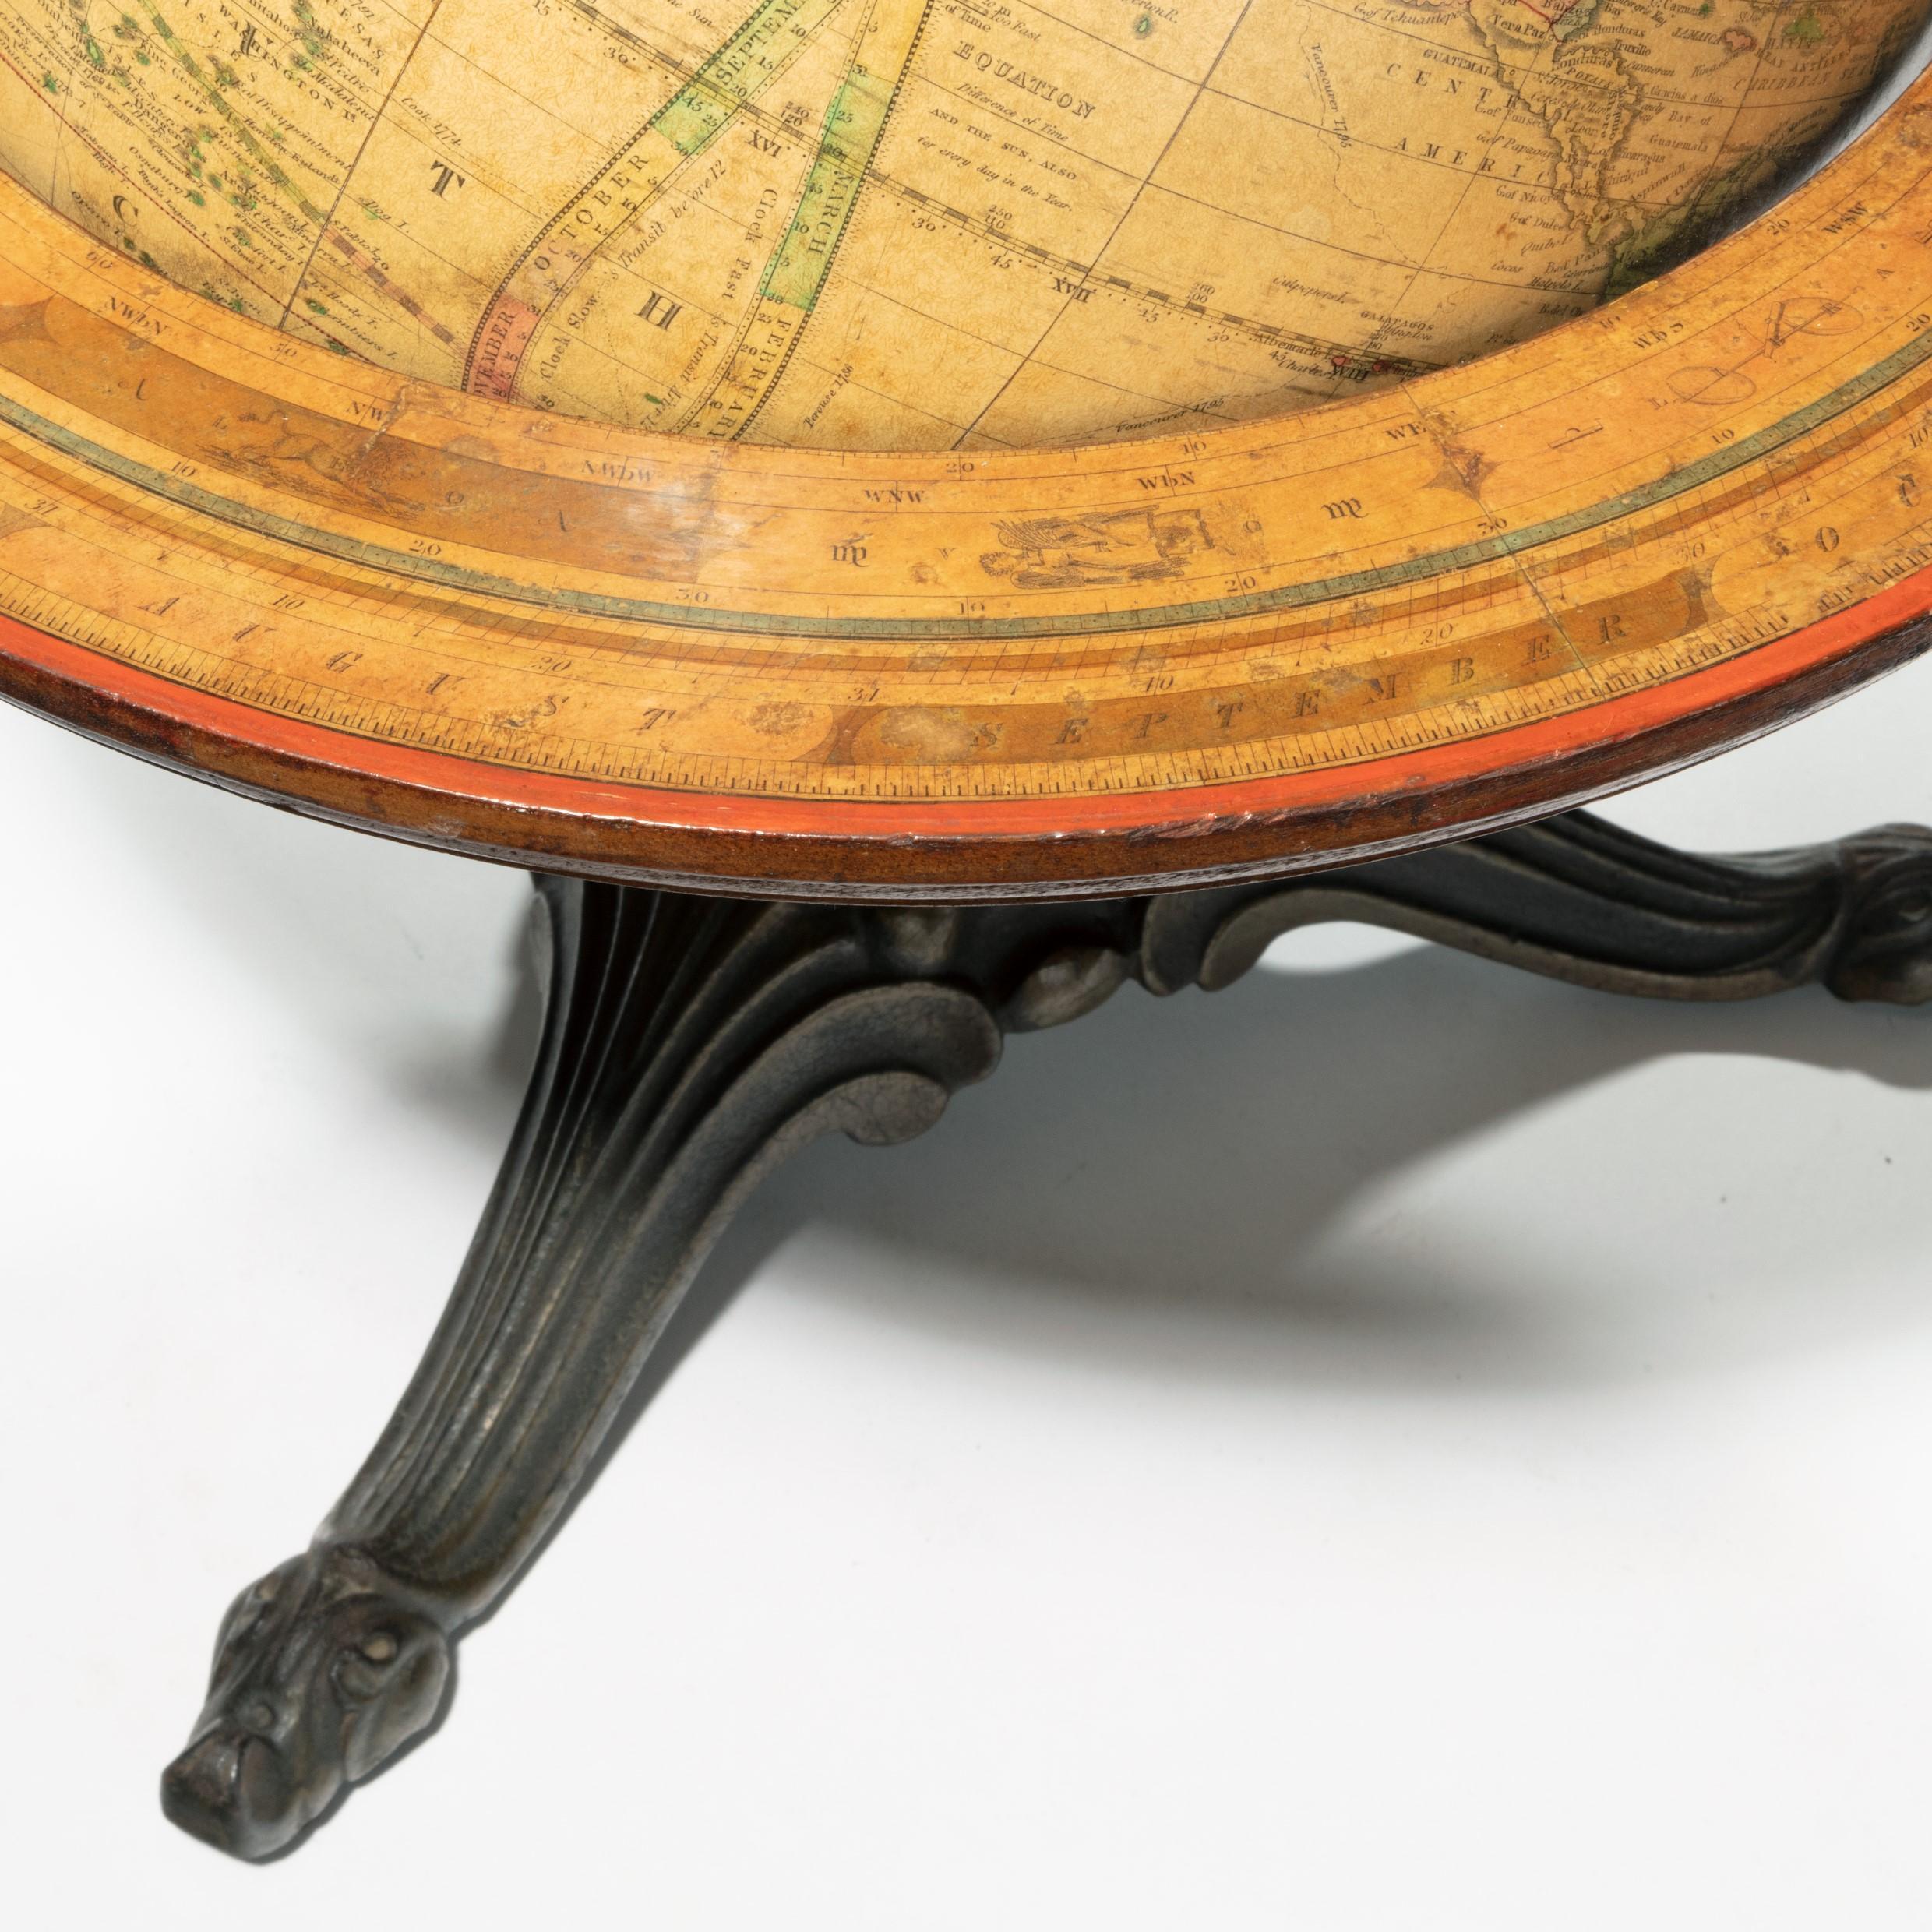 A 12 inch Franklin terrestrial table globe by Nims & Co, New York, the twelve gores engraved and hand-coloured, with a brass calibrated meridian ring and papered horizon ring, all raised on a tripod cast iron base, the cartouche reading “The